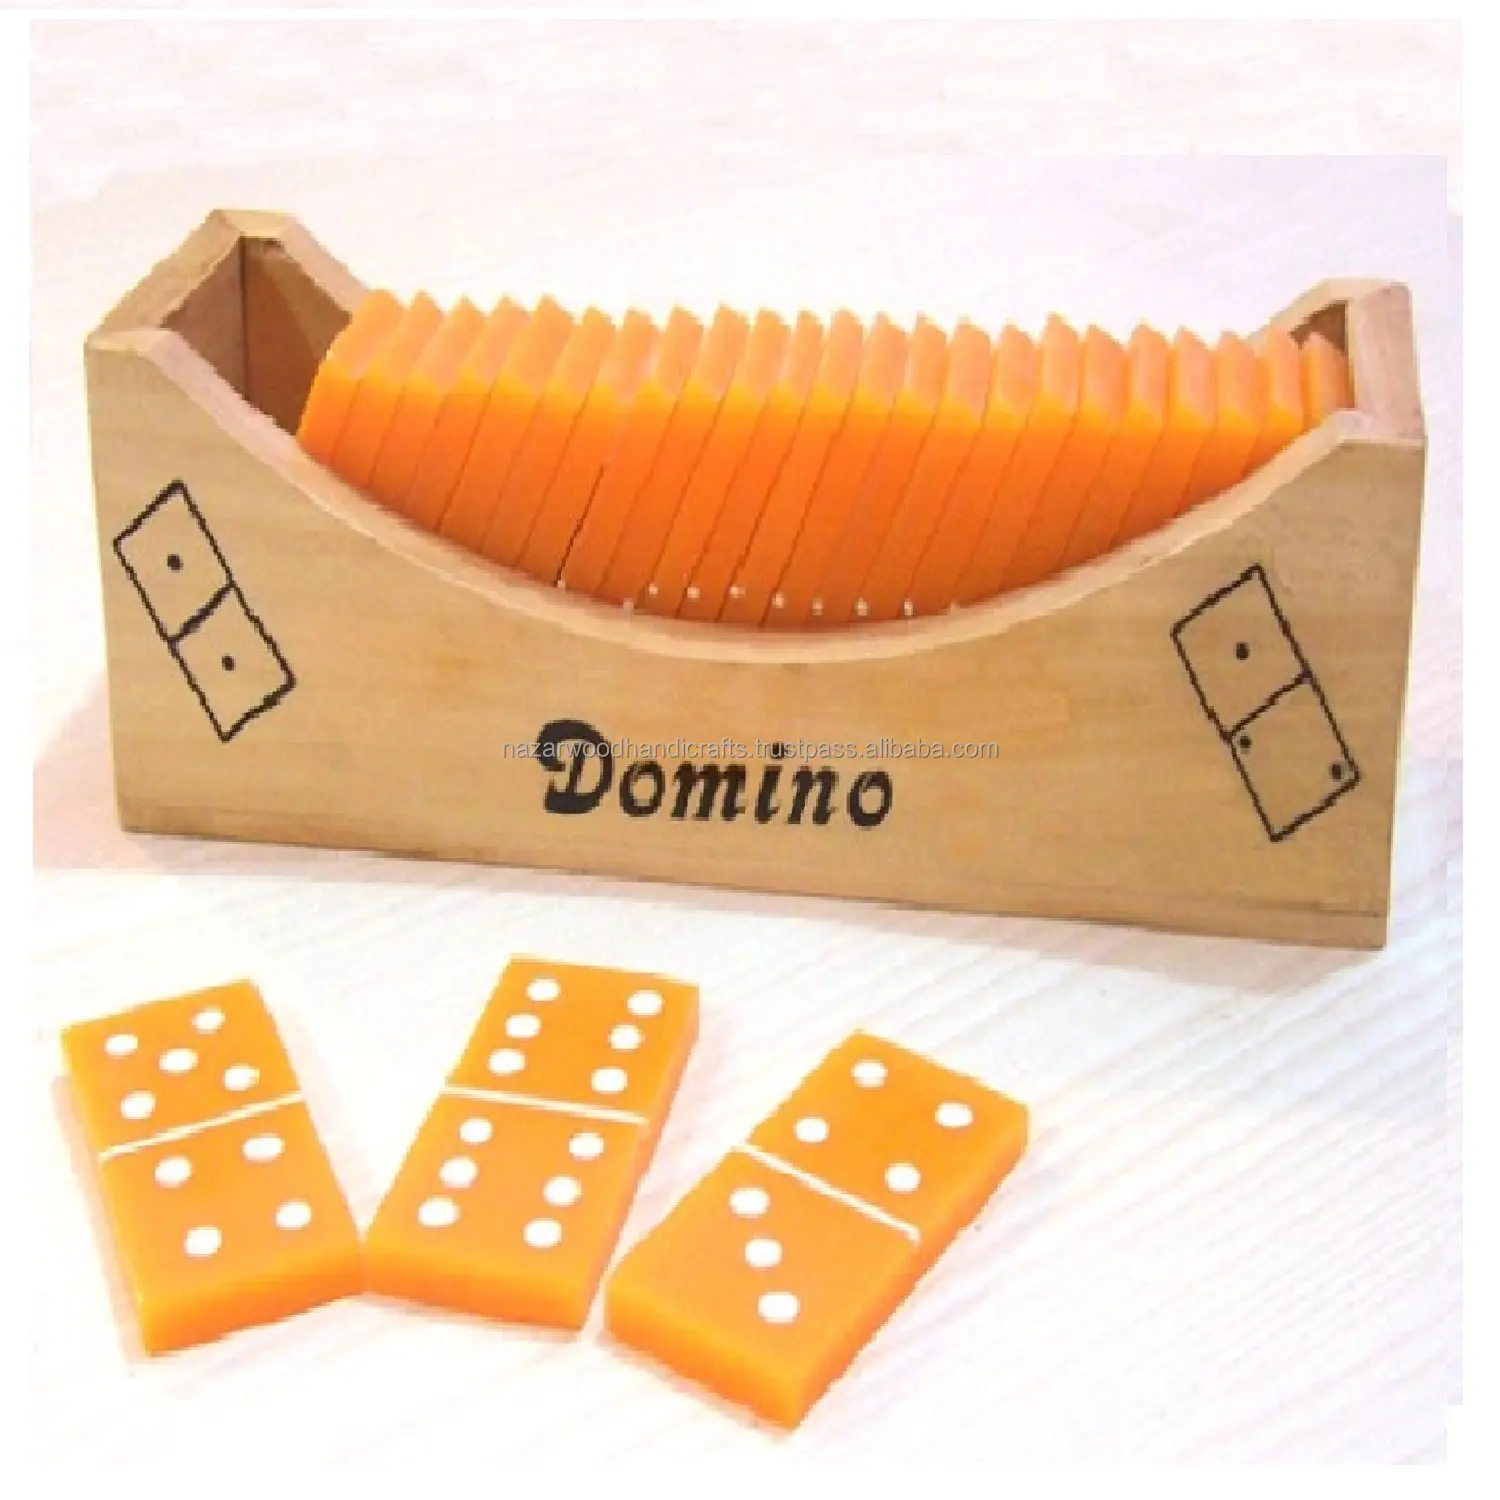 MANGO WOODEN DOMINOES INDOOR GAME FOR EDUCATIONAL GAME PRODUCT WITH CUSTOMIZED SIZE AND DESIGN